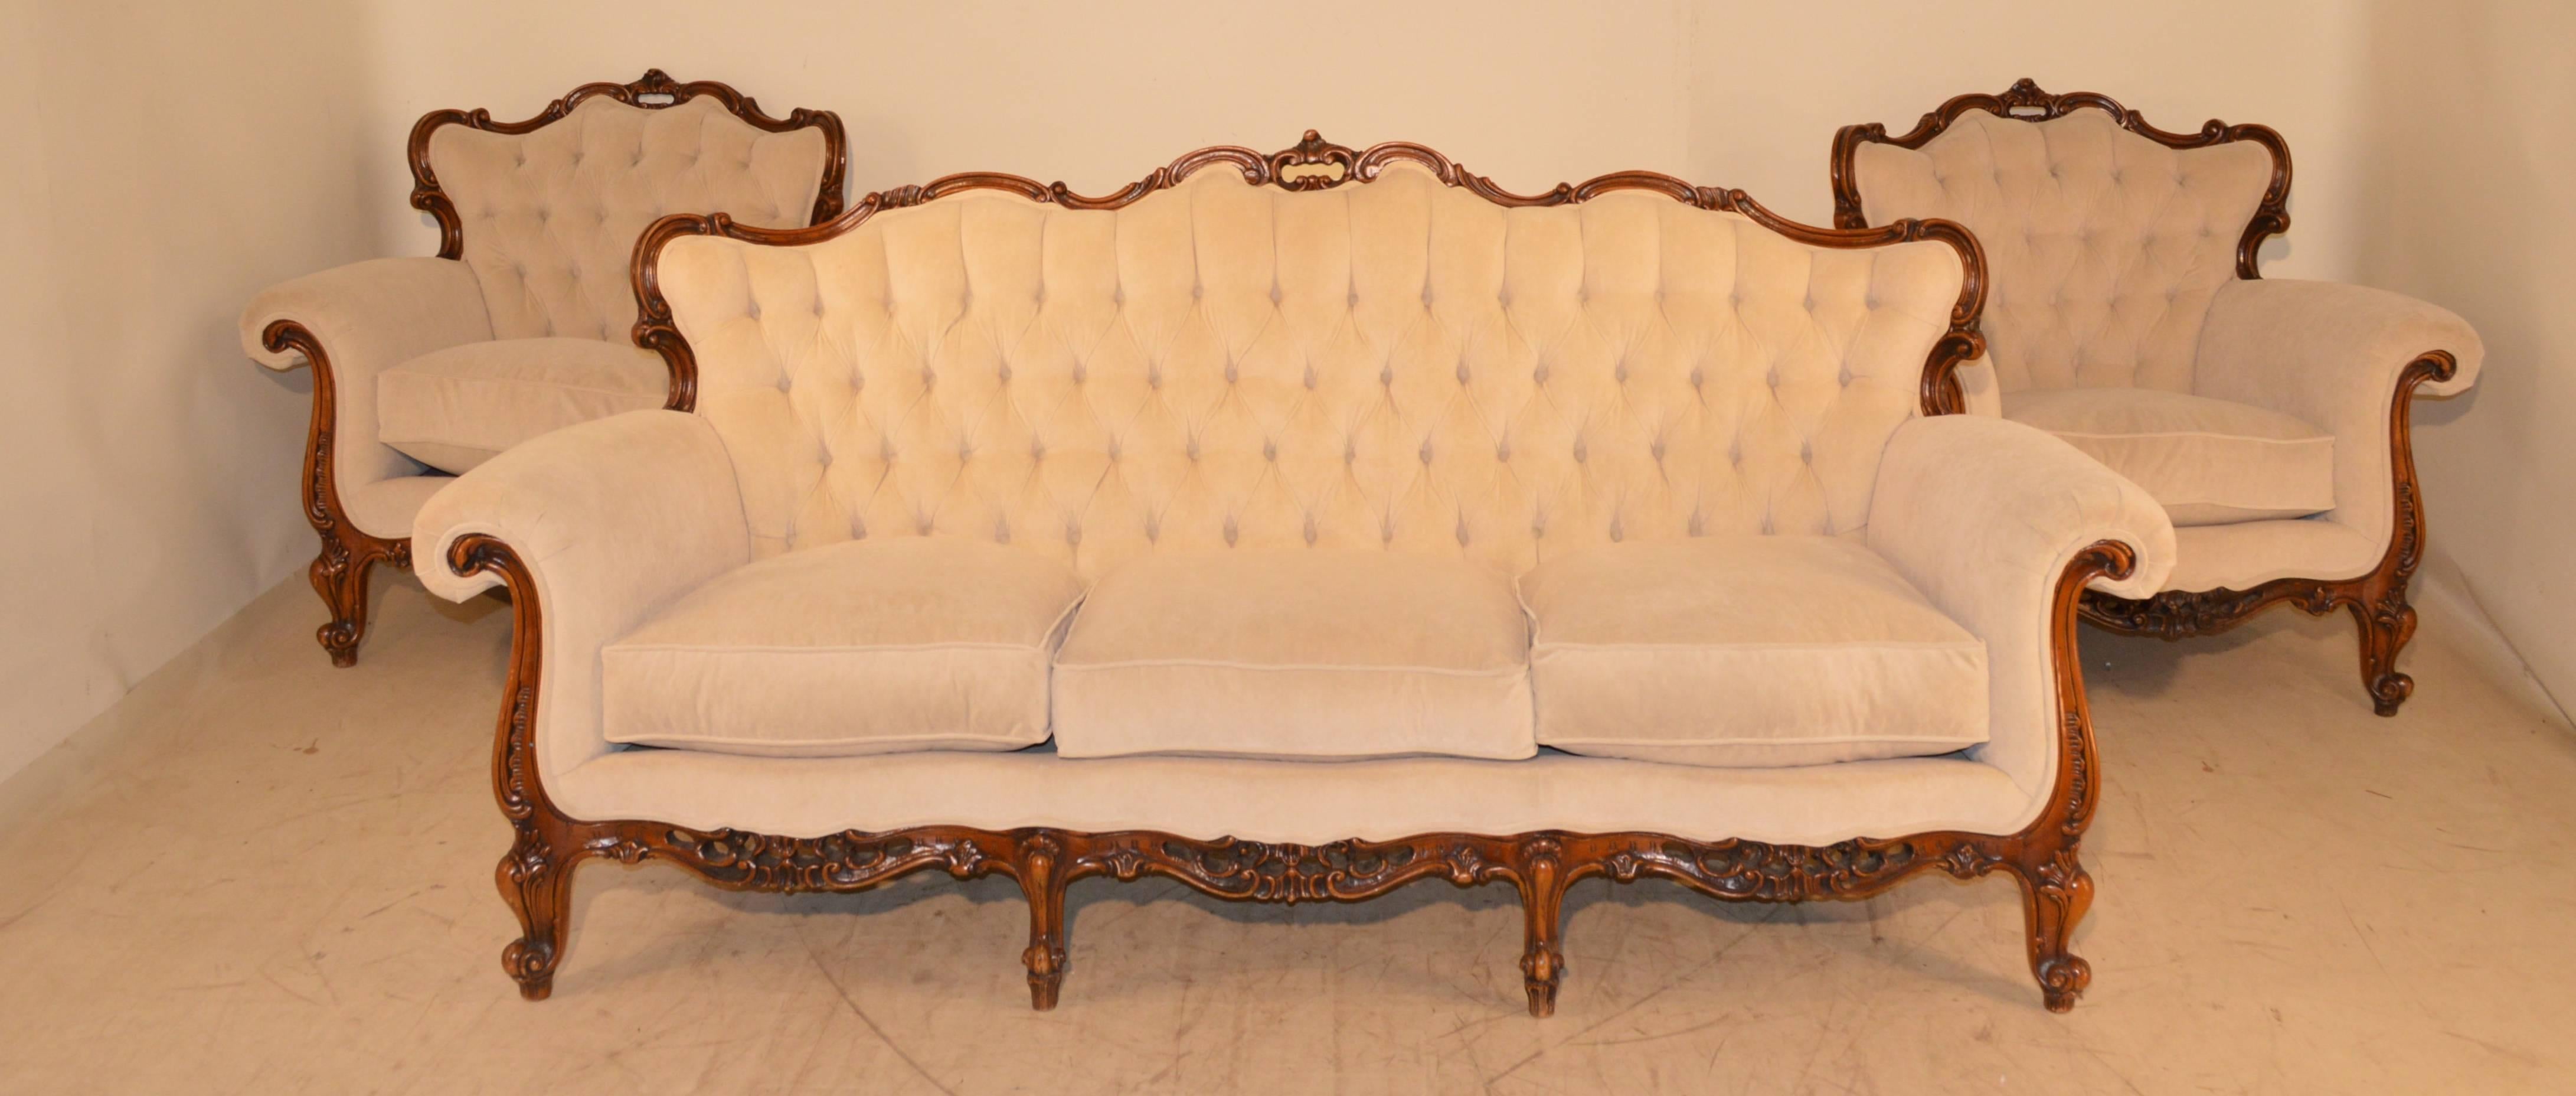 This is the most wonderful and comfortable parlor set we've ever had! The frames are solid walnut with hand-carved decoration and we had them re-upholstered in the same pattern in which they were originally. The three pieces are covered all the way